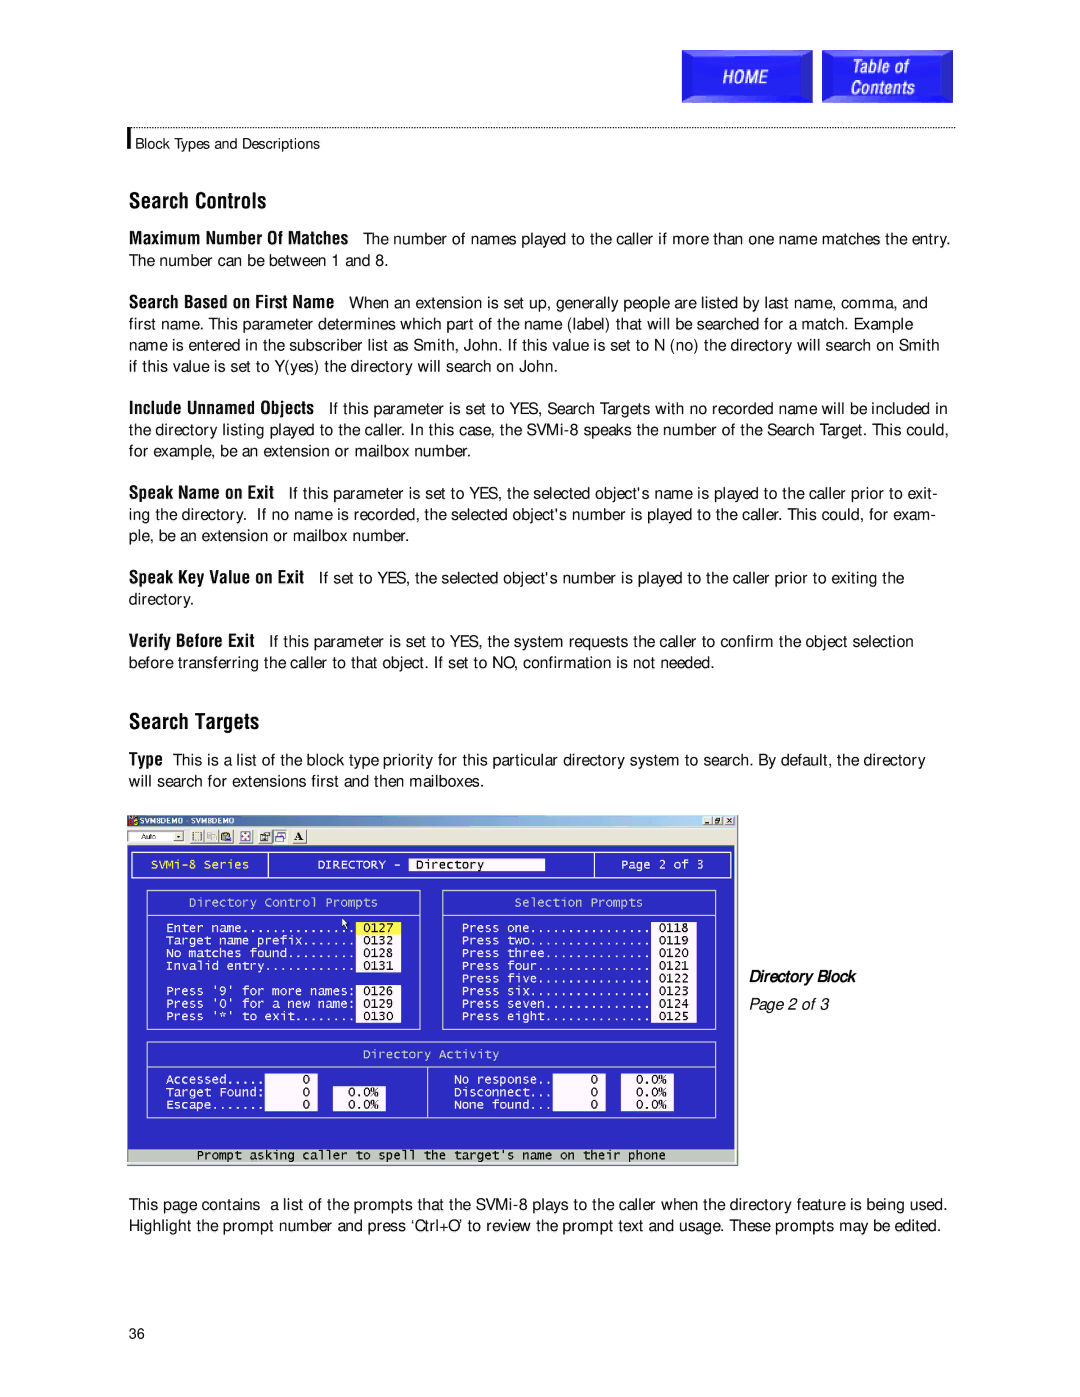 Samsung SVMi-8 technical manual Search Controls, Search Targets 